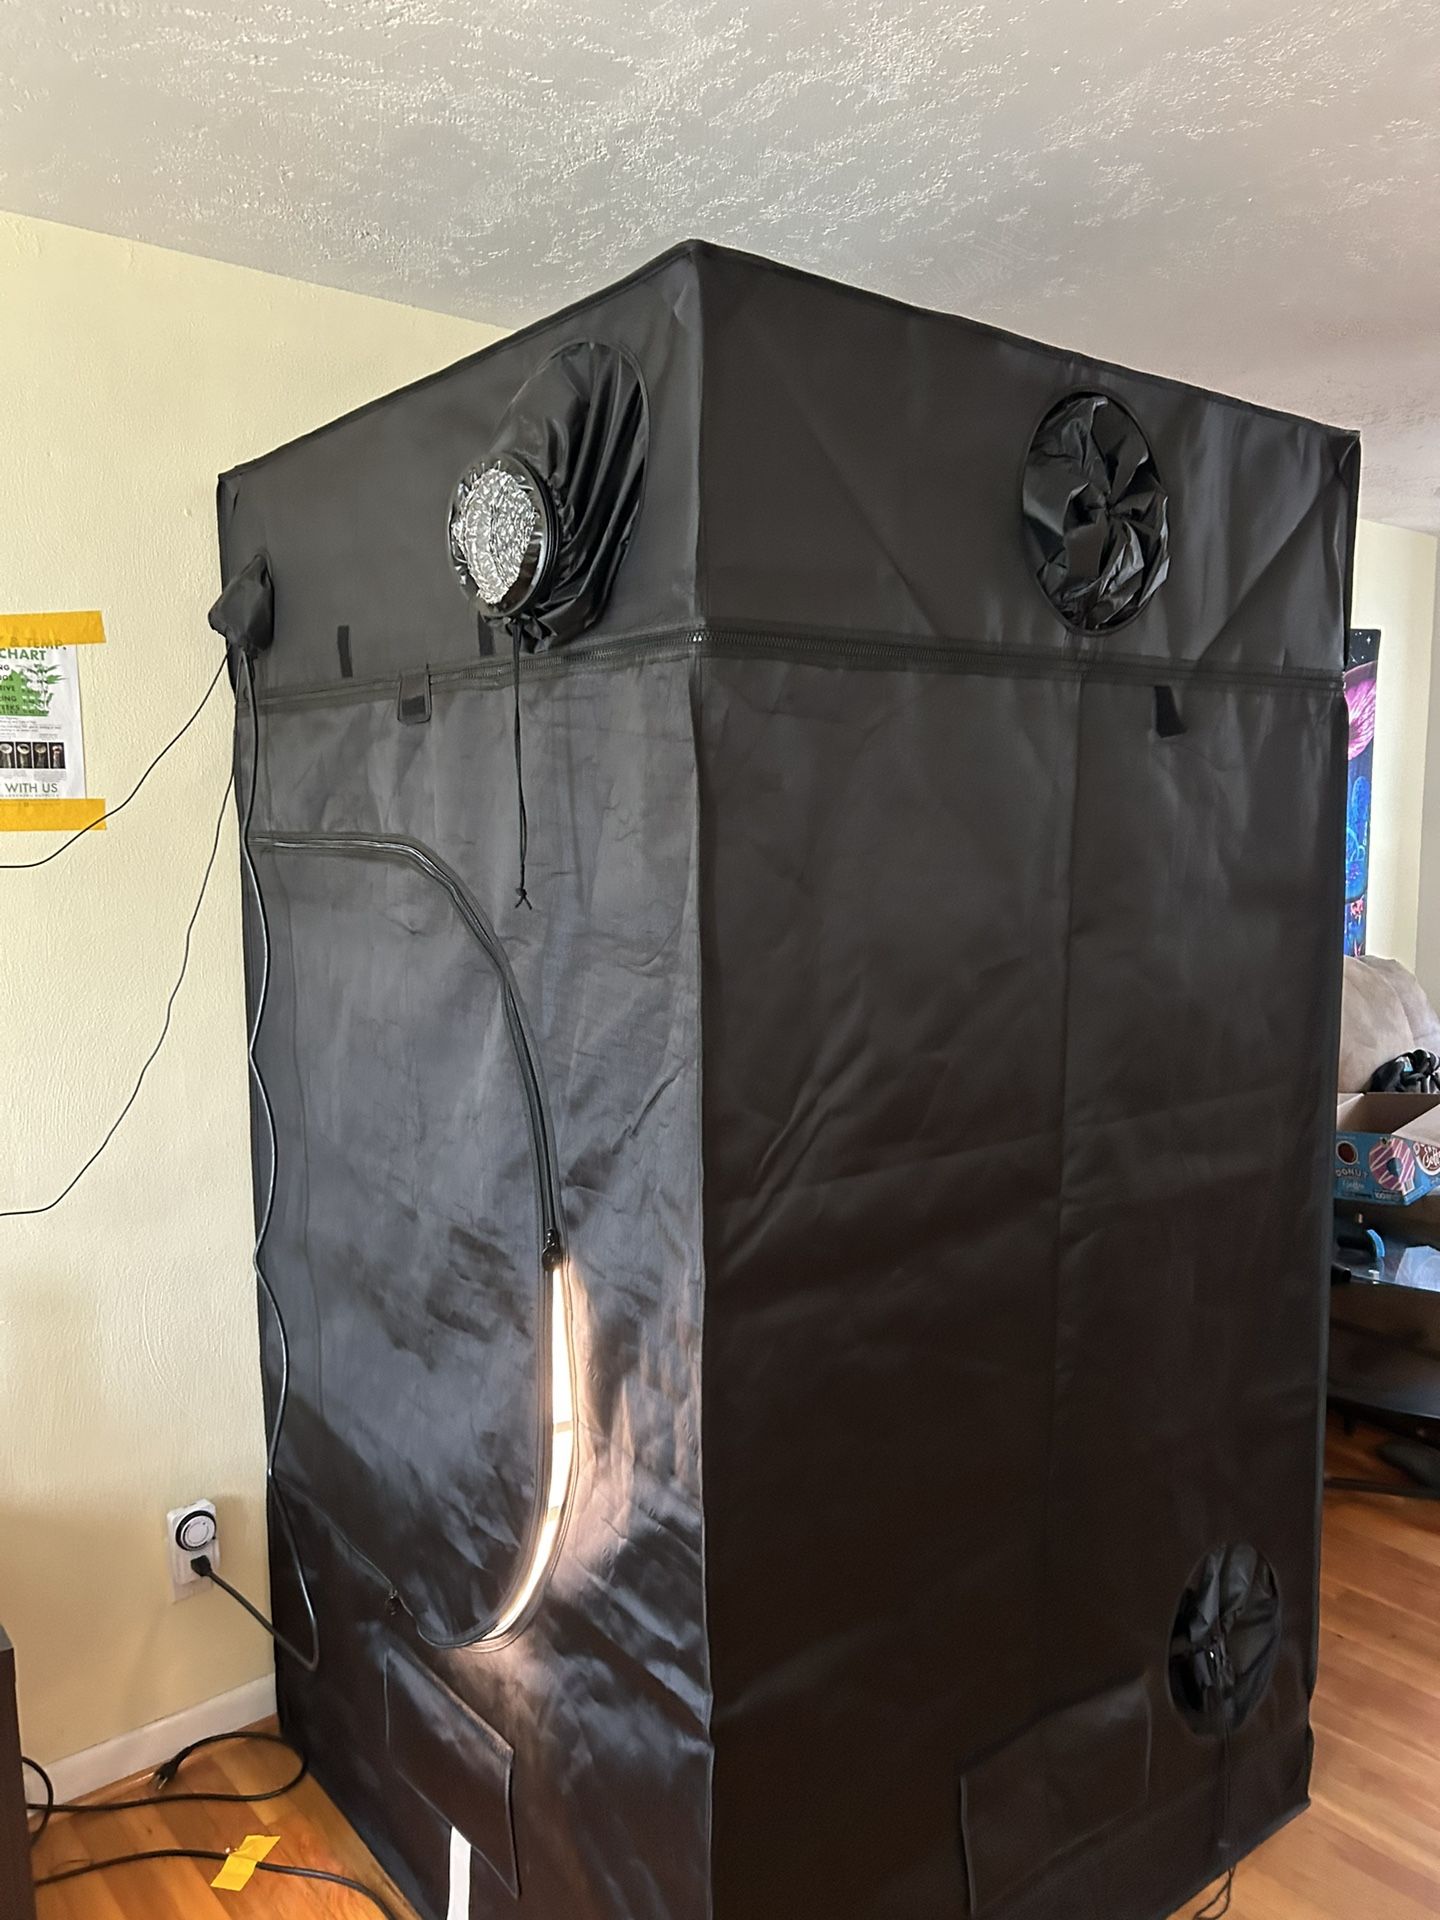 4 X 4 Gorilla Grow Tent w/ Everything You’d Need